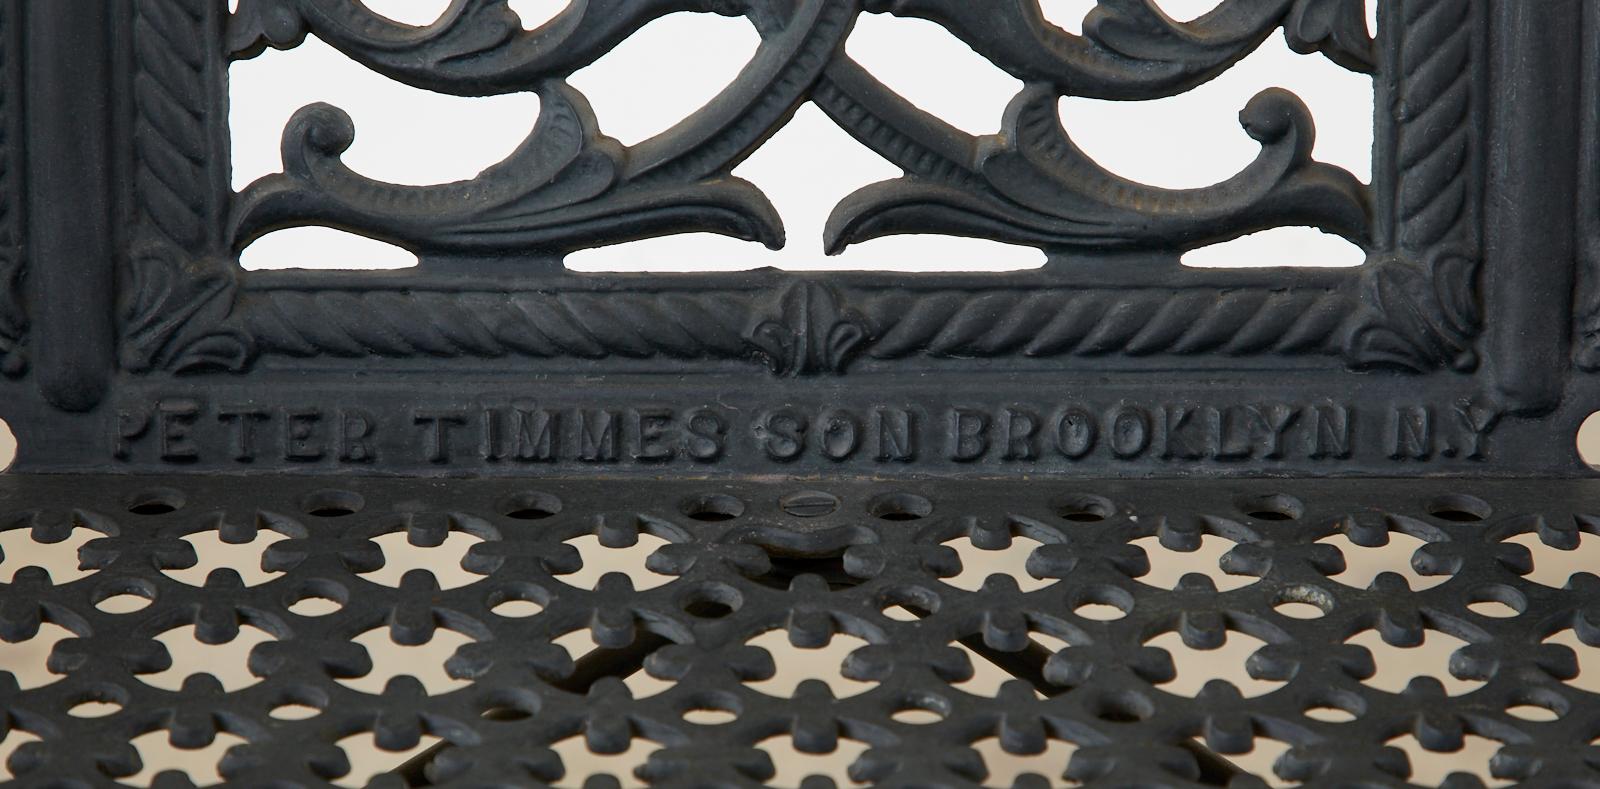 Petite Cast Iron Gothic Bench after Peter Timmes Son 2